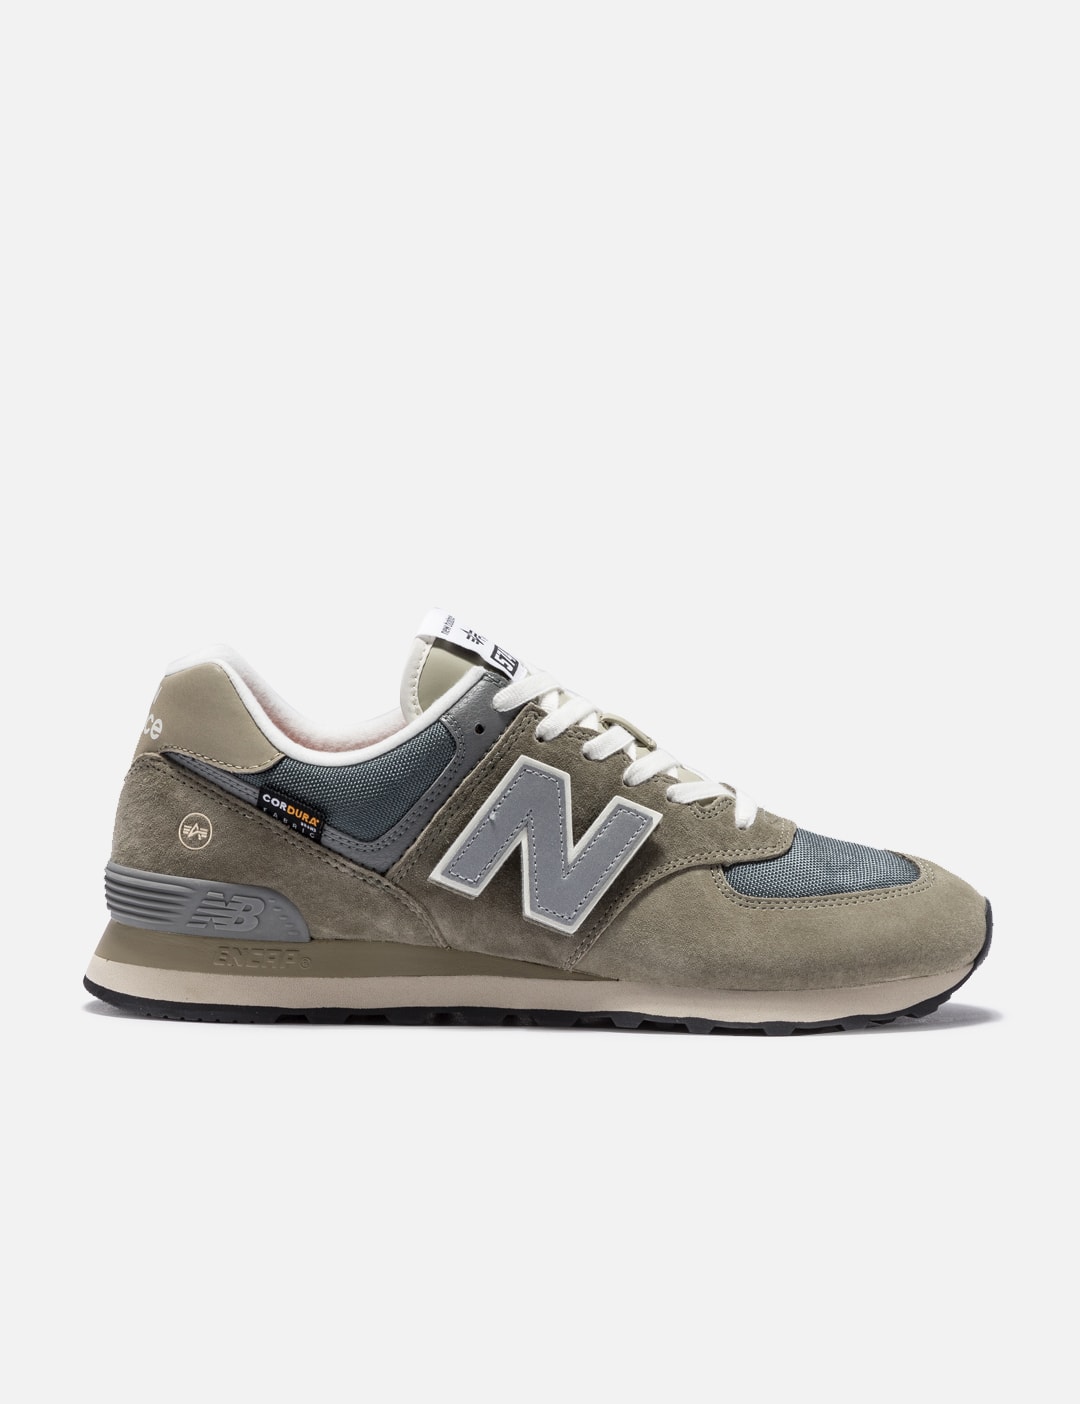 New Balance - NEW BALANCE INDUSTRIES 574 TRAINERS | HBX - Globally Curated Fashion and Lifestyle by Hypebeast